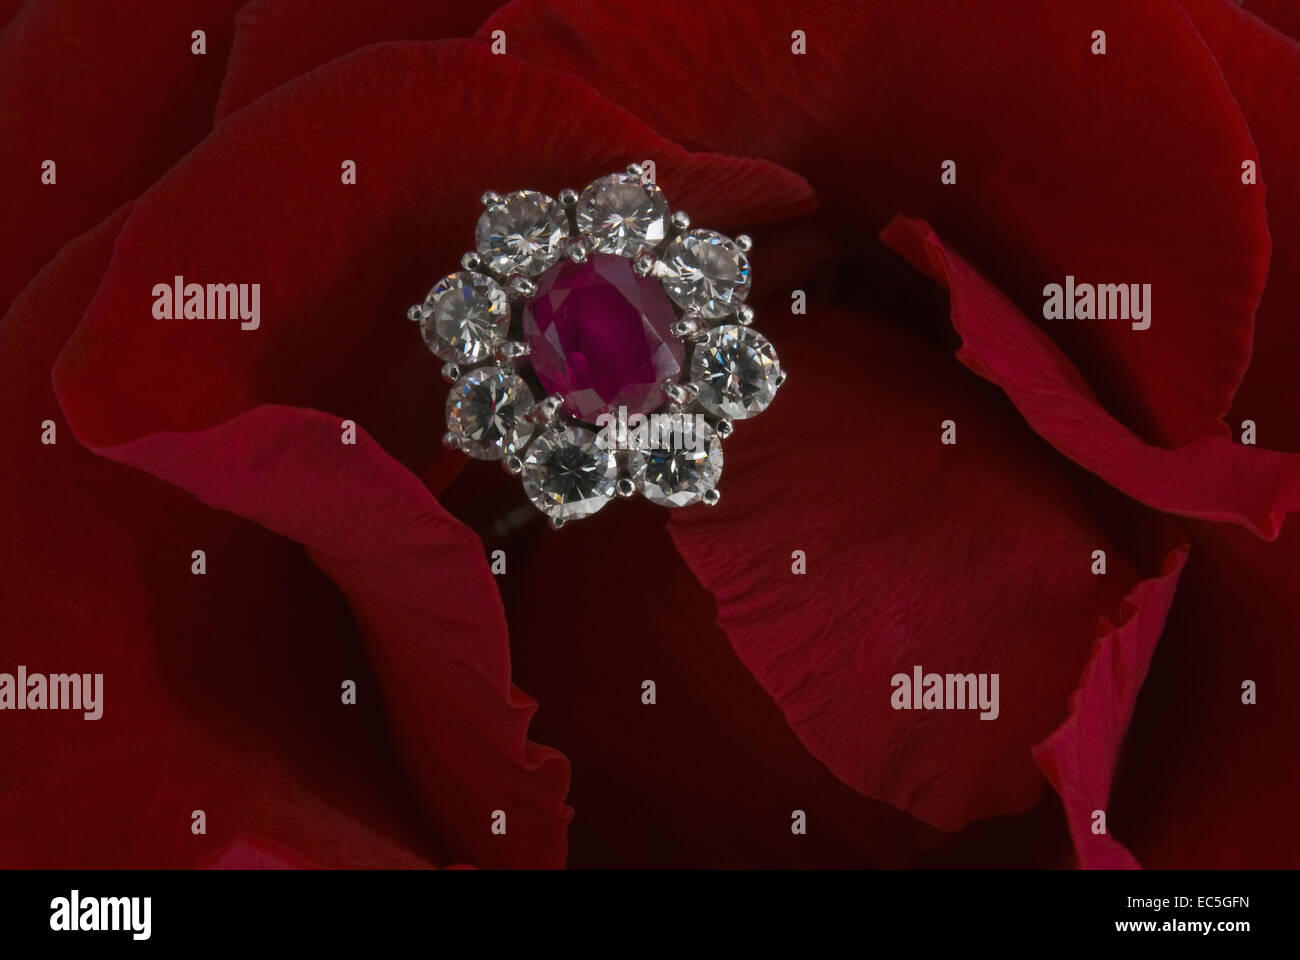 luxuriuos diamond ring in a red rose Stock Photo